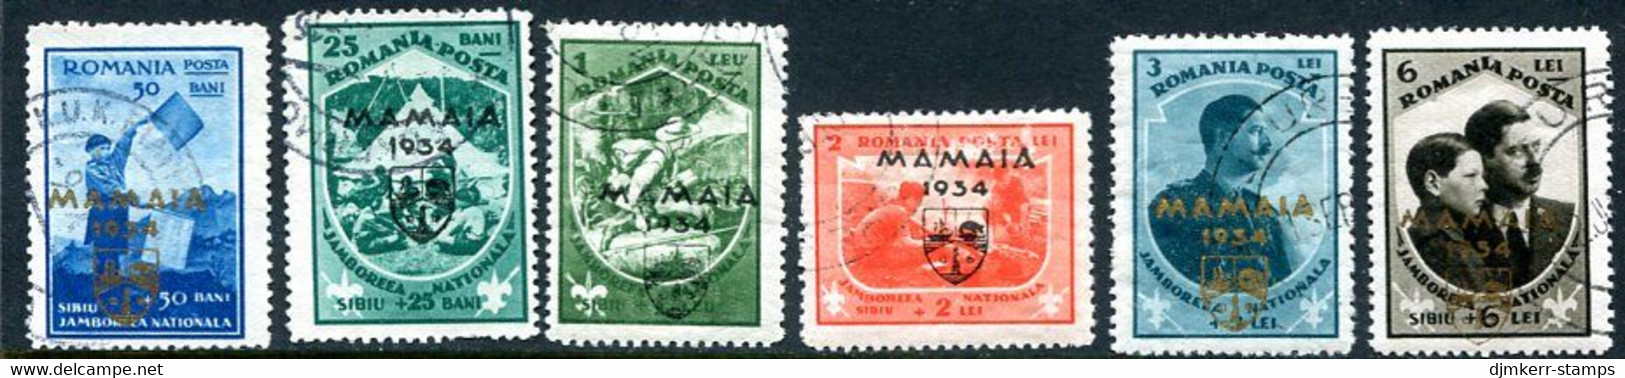 ROMANIA 1934 Mamaia Scout Jamboree Set  Used.  Michel 468-73 - Used Stamps